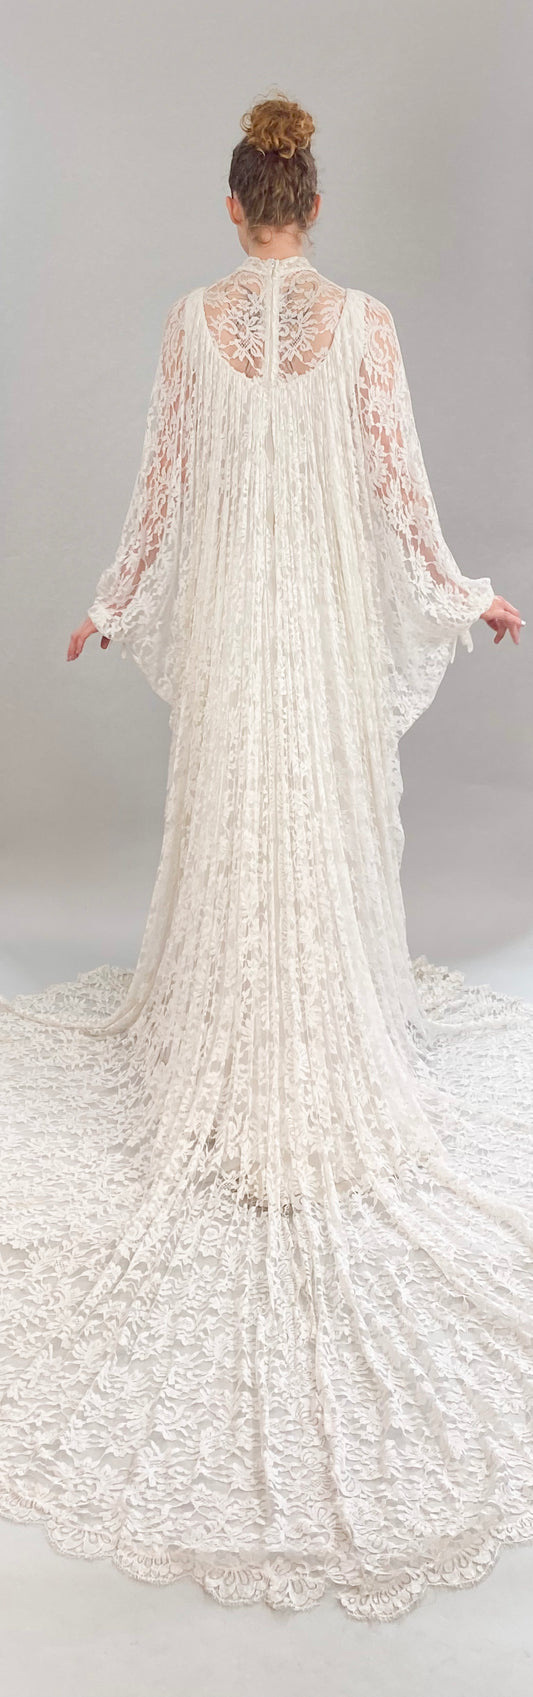 Vintage White Lace Bridal Gown with Batwing Sleeves & Train back view